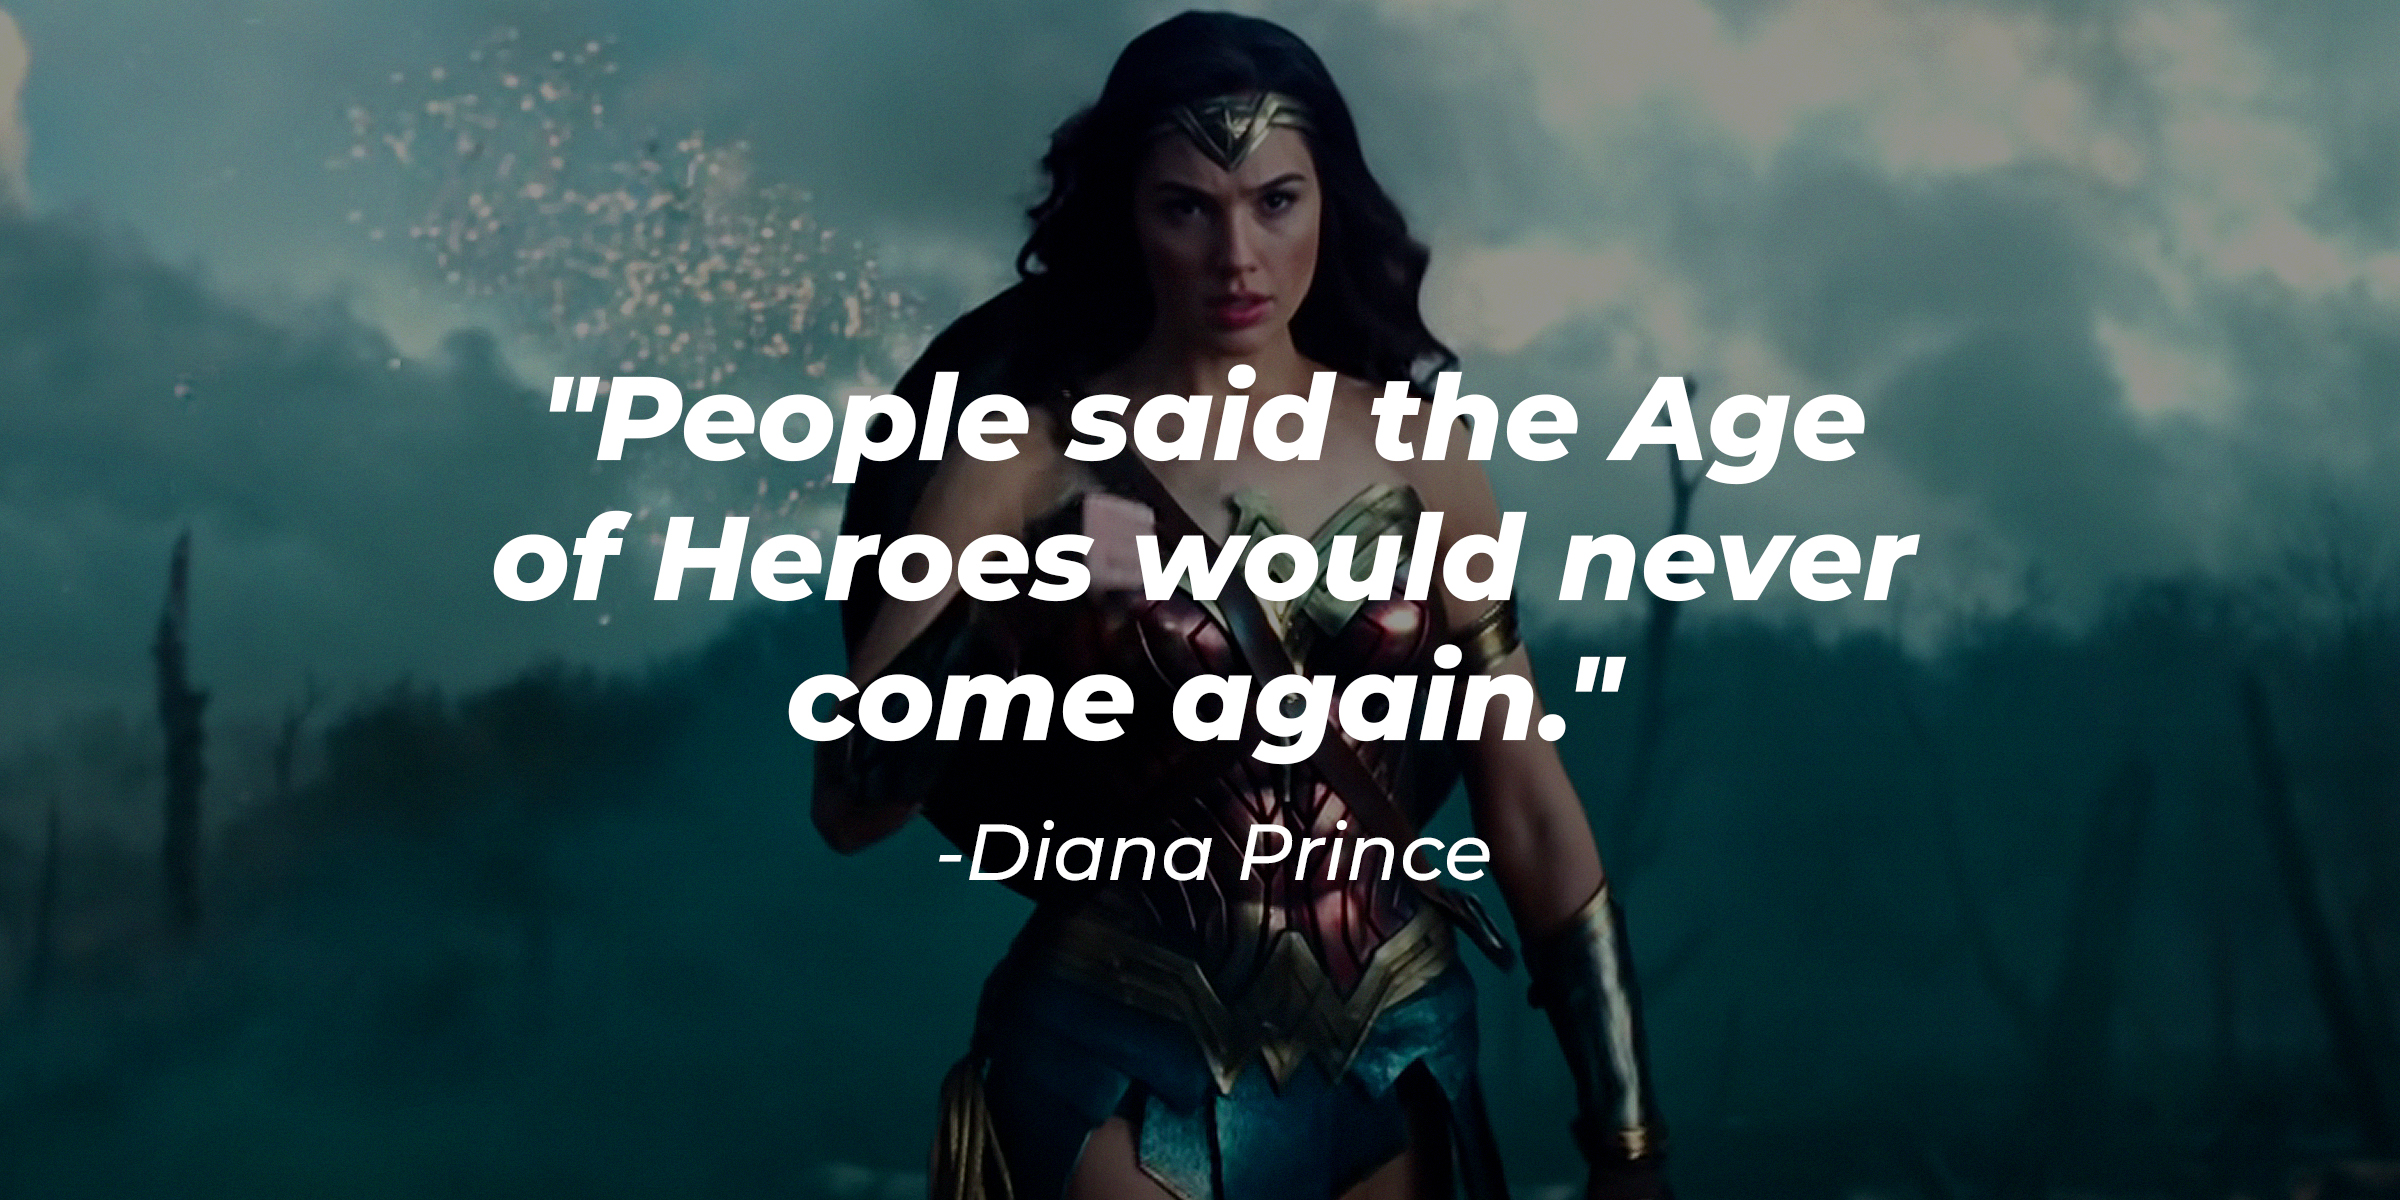 Diana Prince's quote, "People said the Age of Heroes would never come again." | Source: youtube.com/WarnerBrosPictures